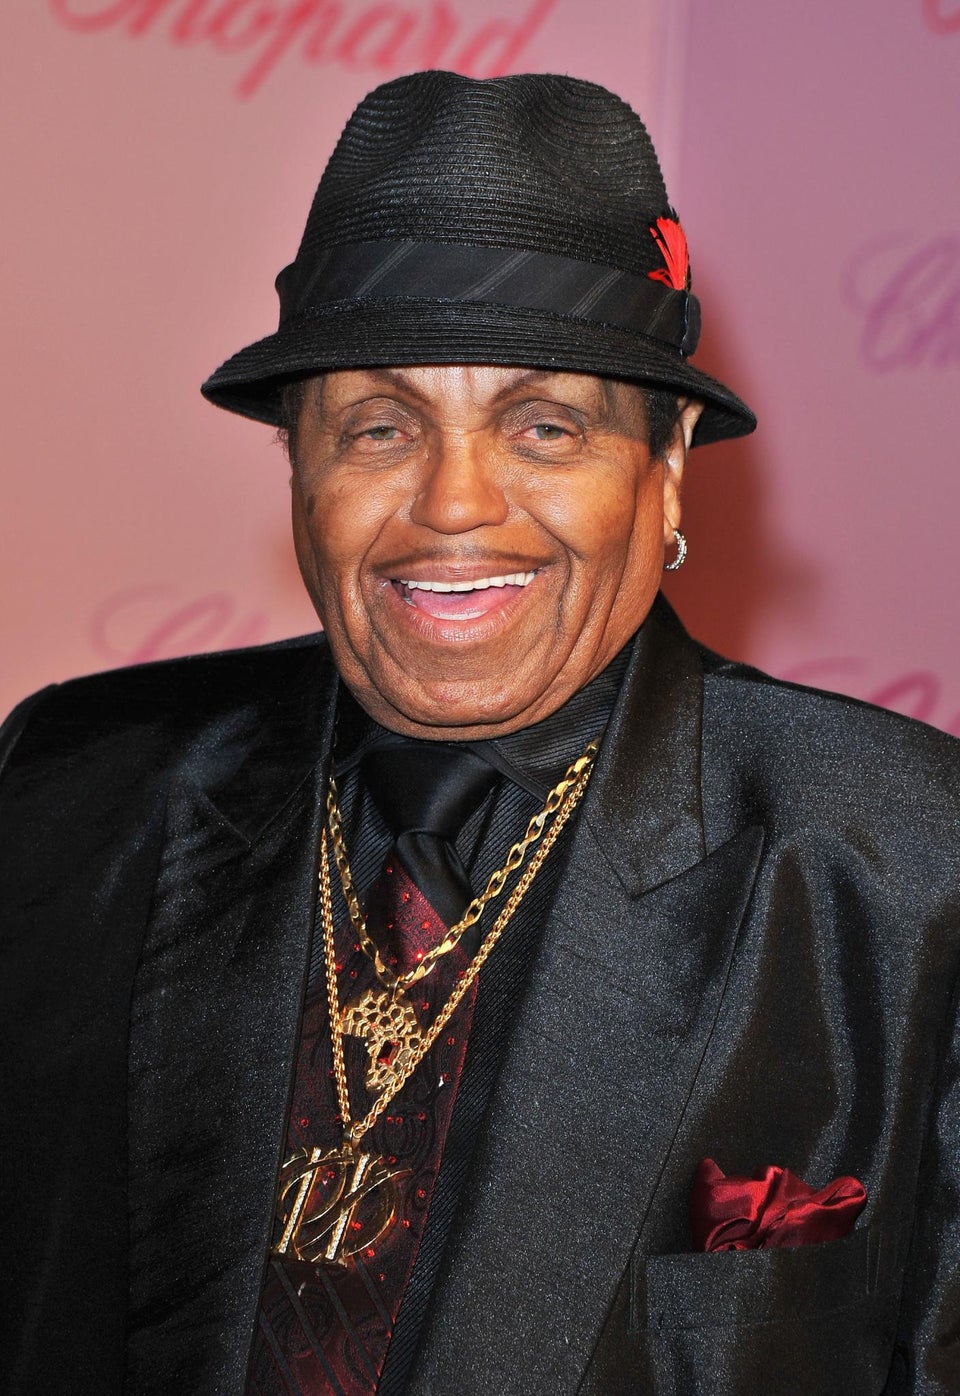 Joe Jackson Hospitalized With Terminal Cancer: ‘He Doesn’t Have Long’